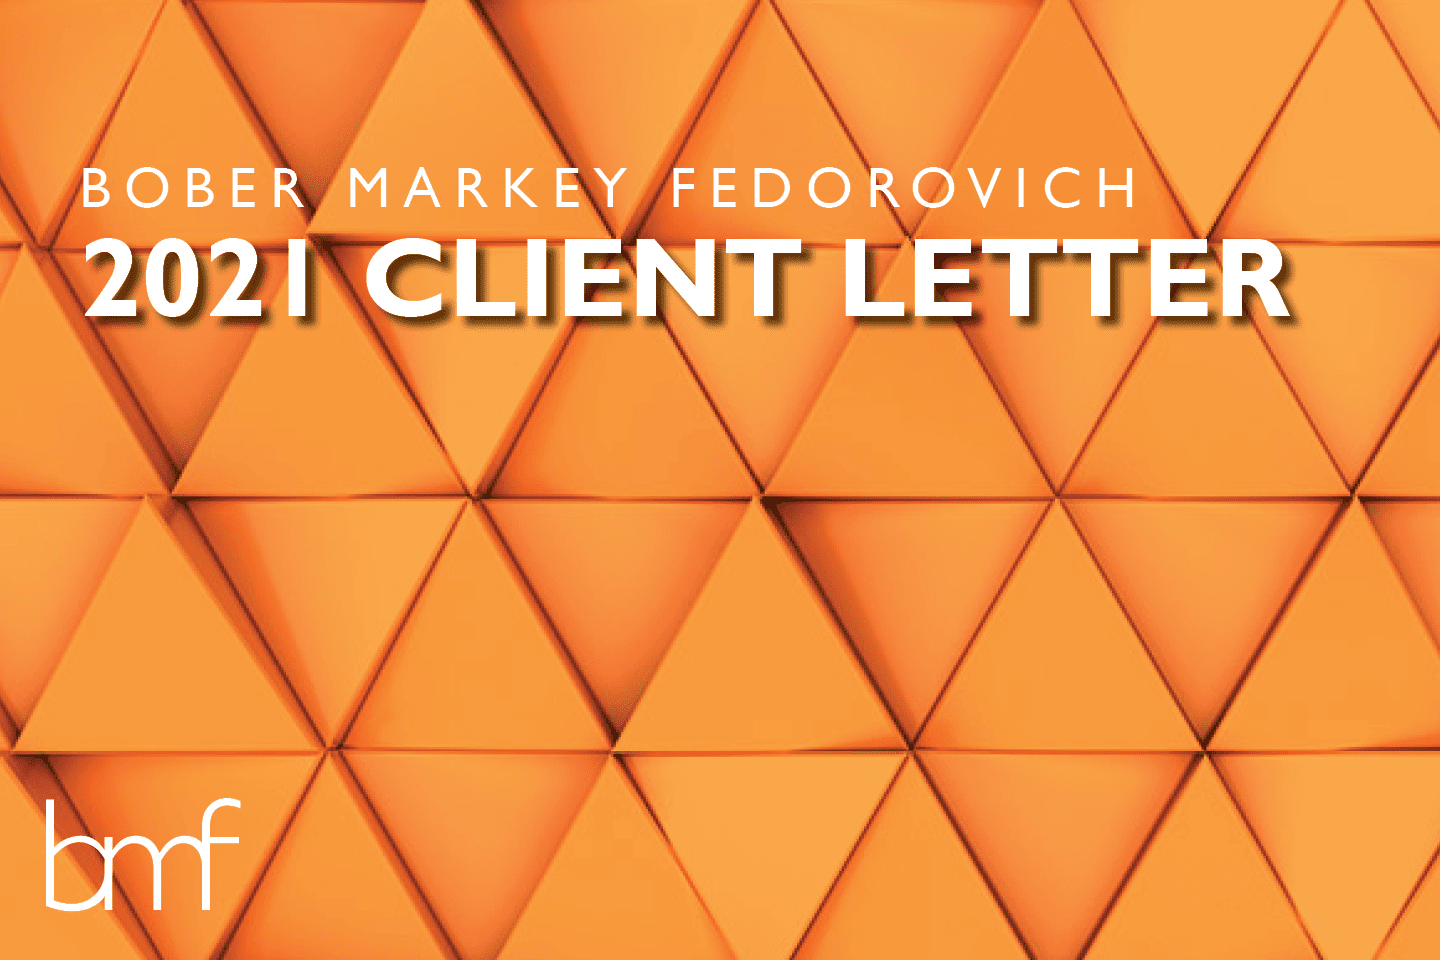 2021 Client Letter: A Year in Review